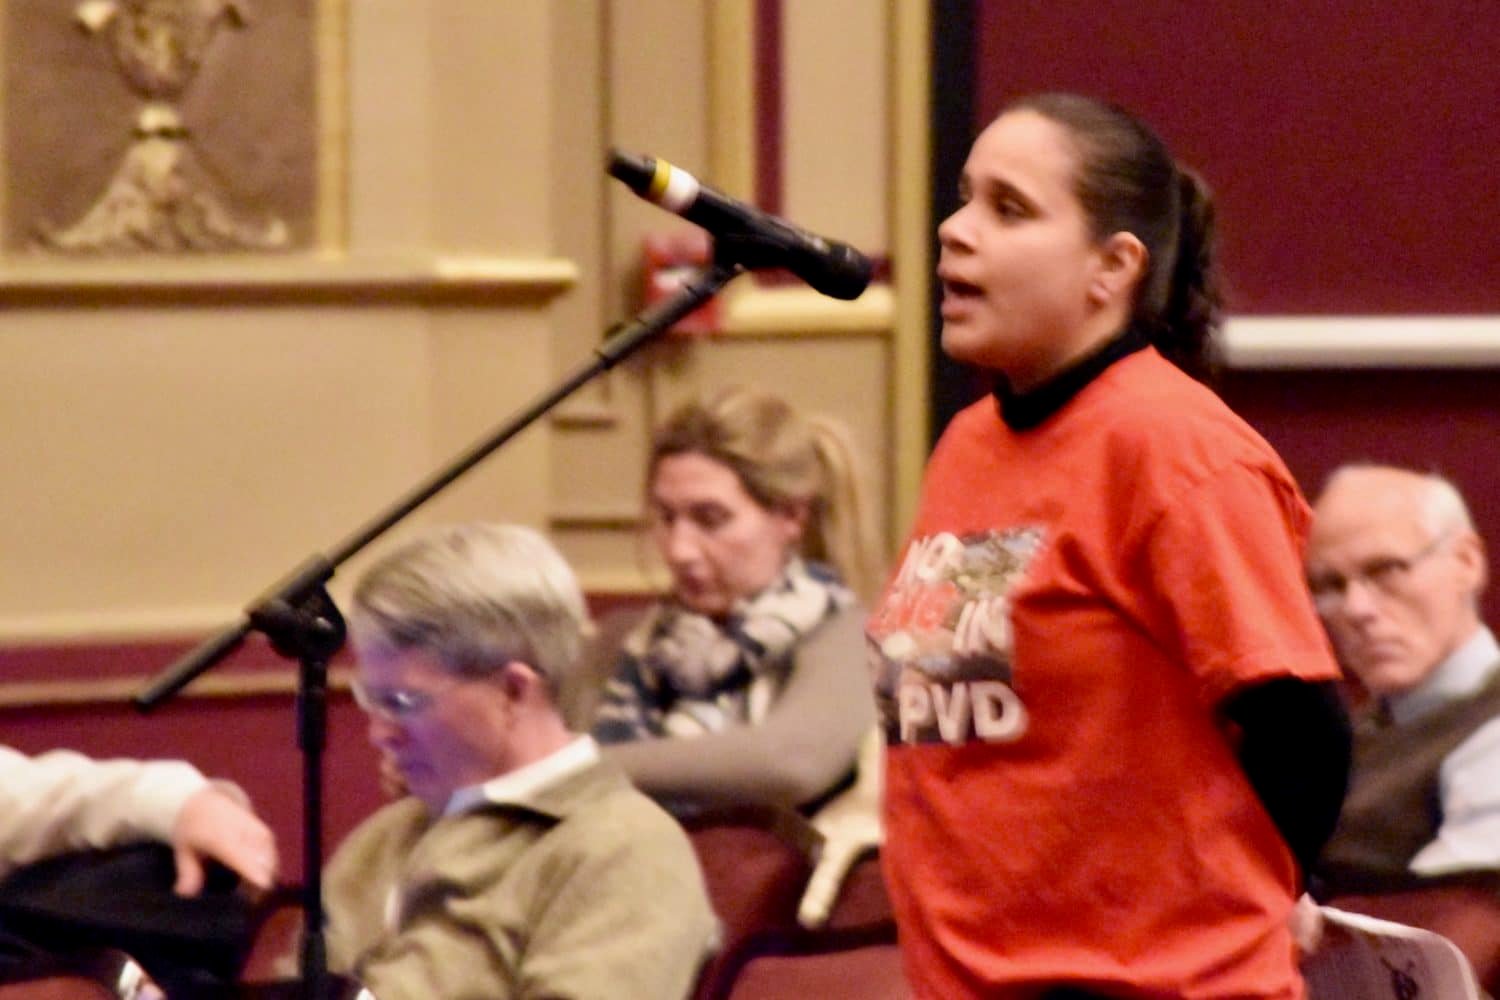 Rhode Island News: DEM hearing on National Grid LNG project was inaccessible and exclusionary